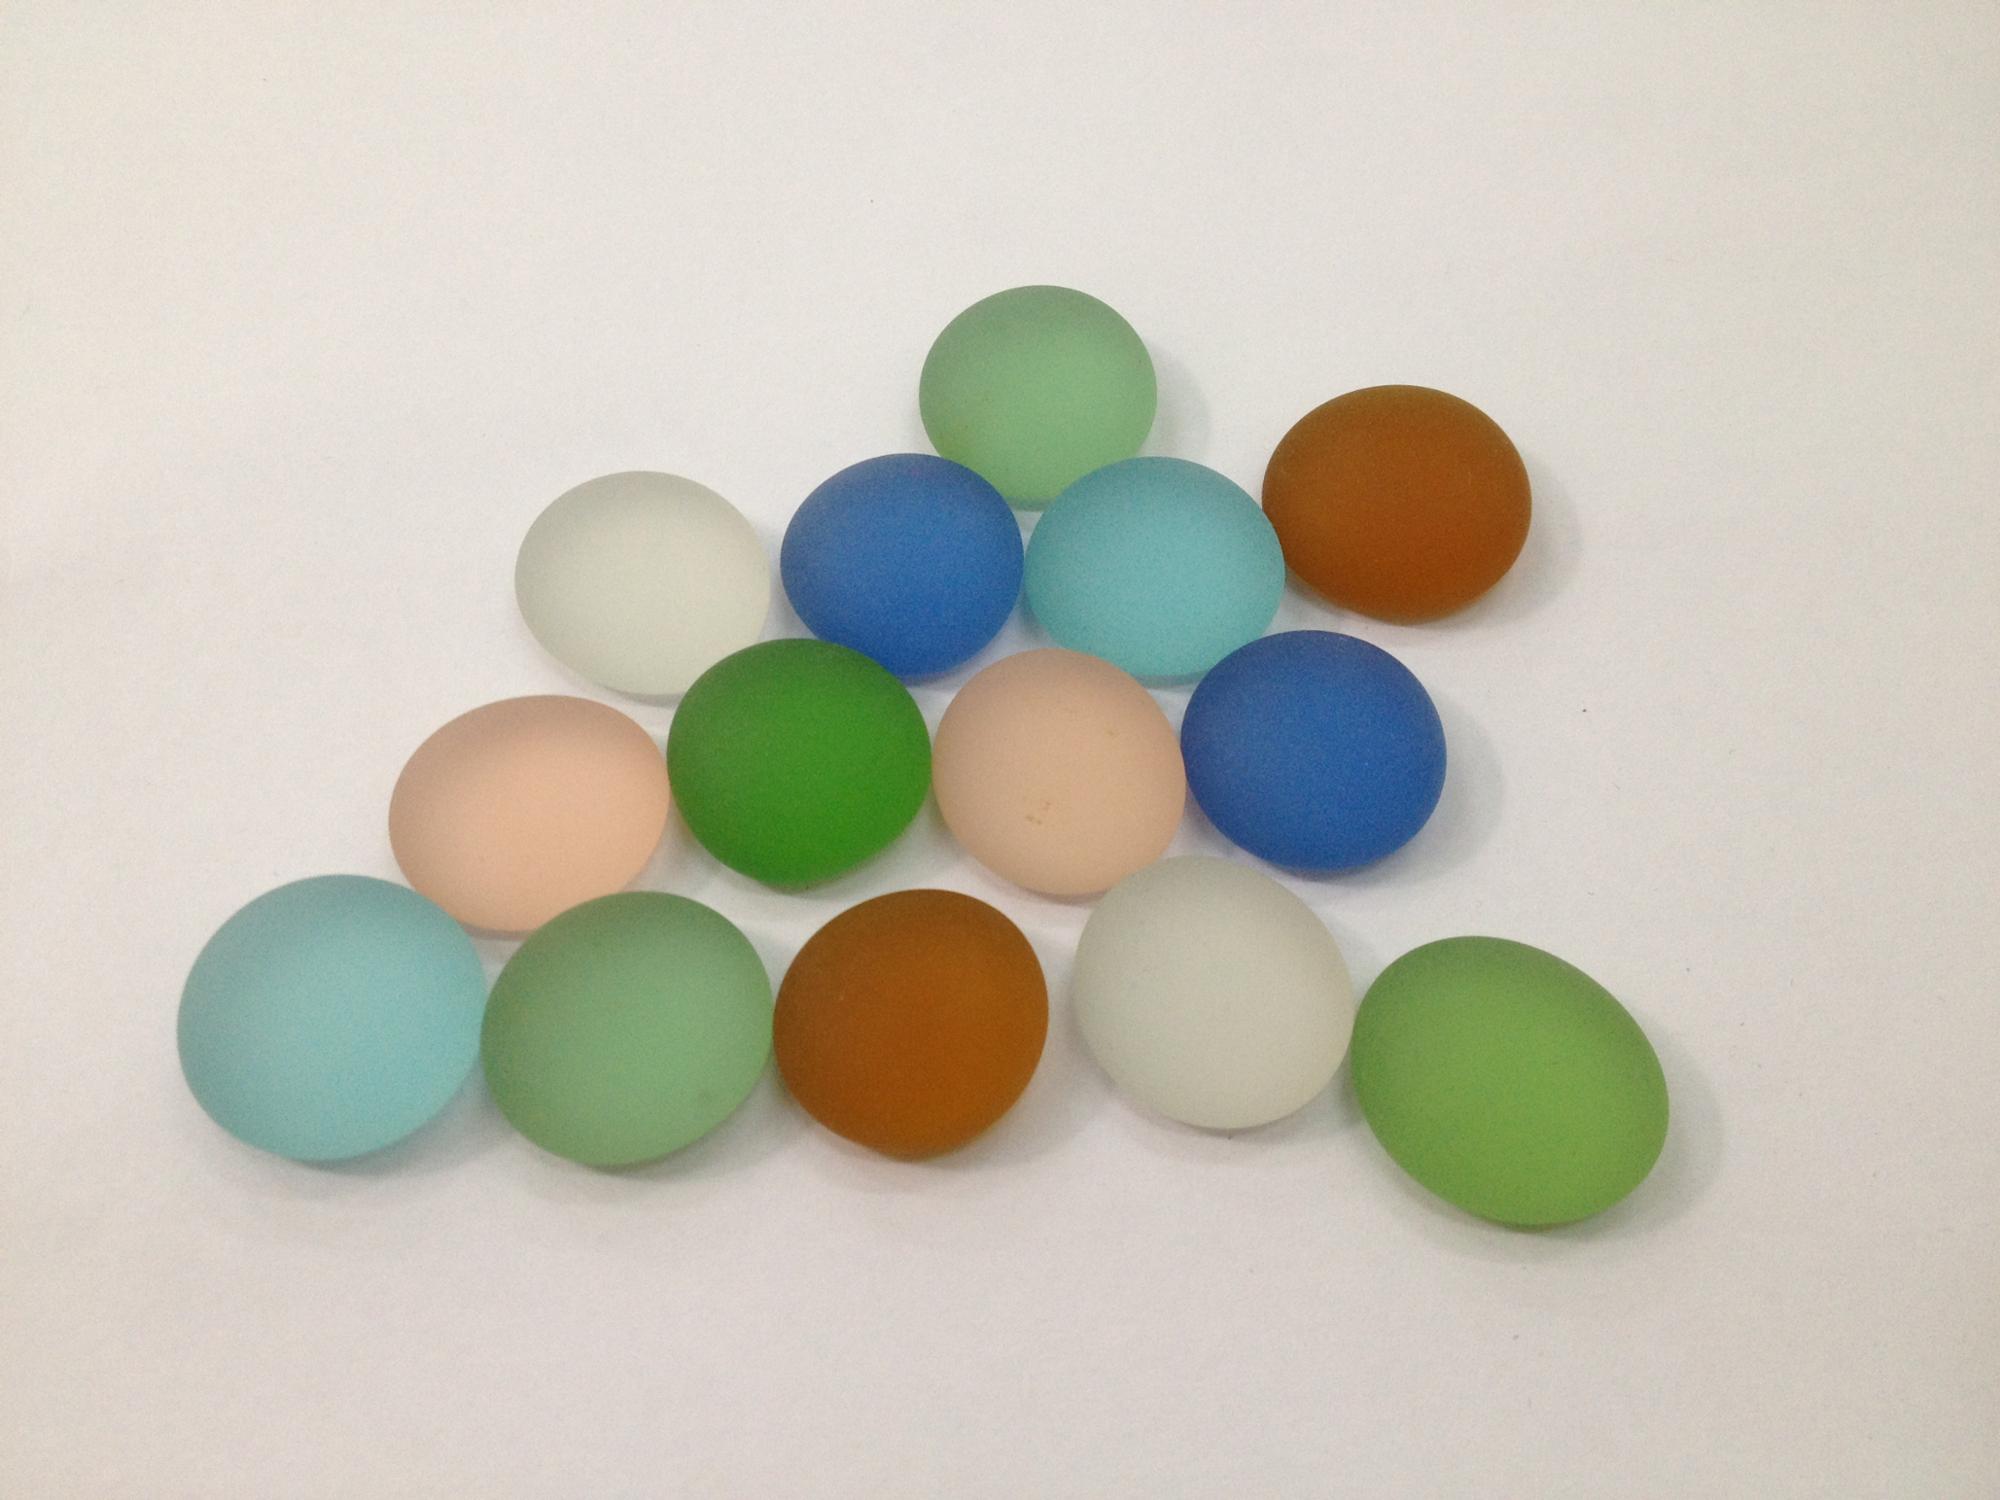 17-20mm round solid glass pebble craft mosaic tiles for Home Decoration or DIY Crafts